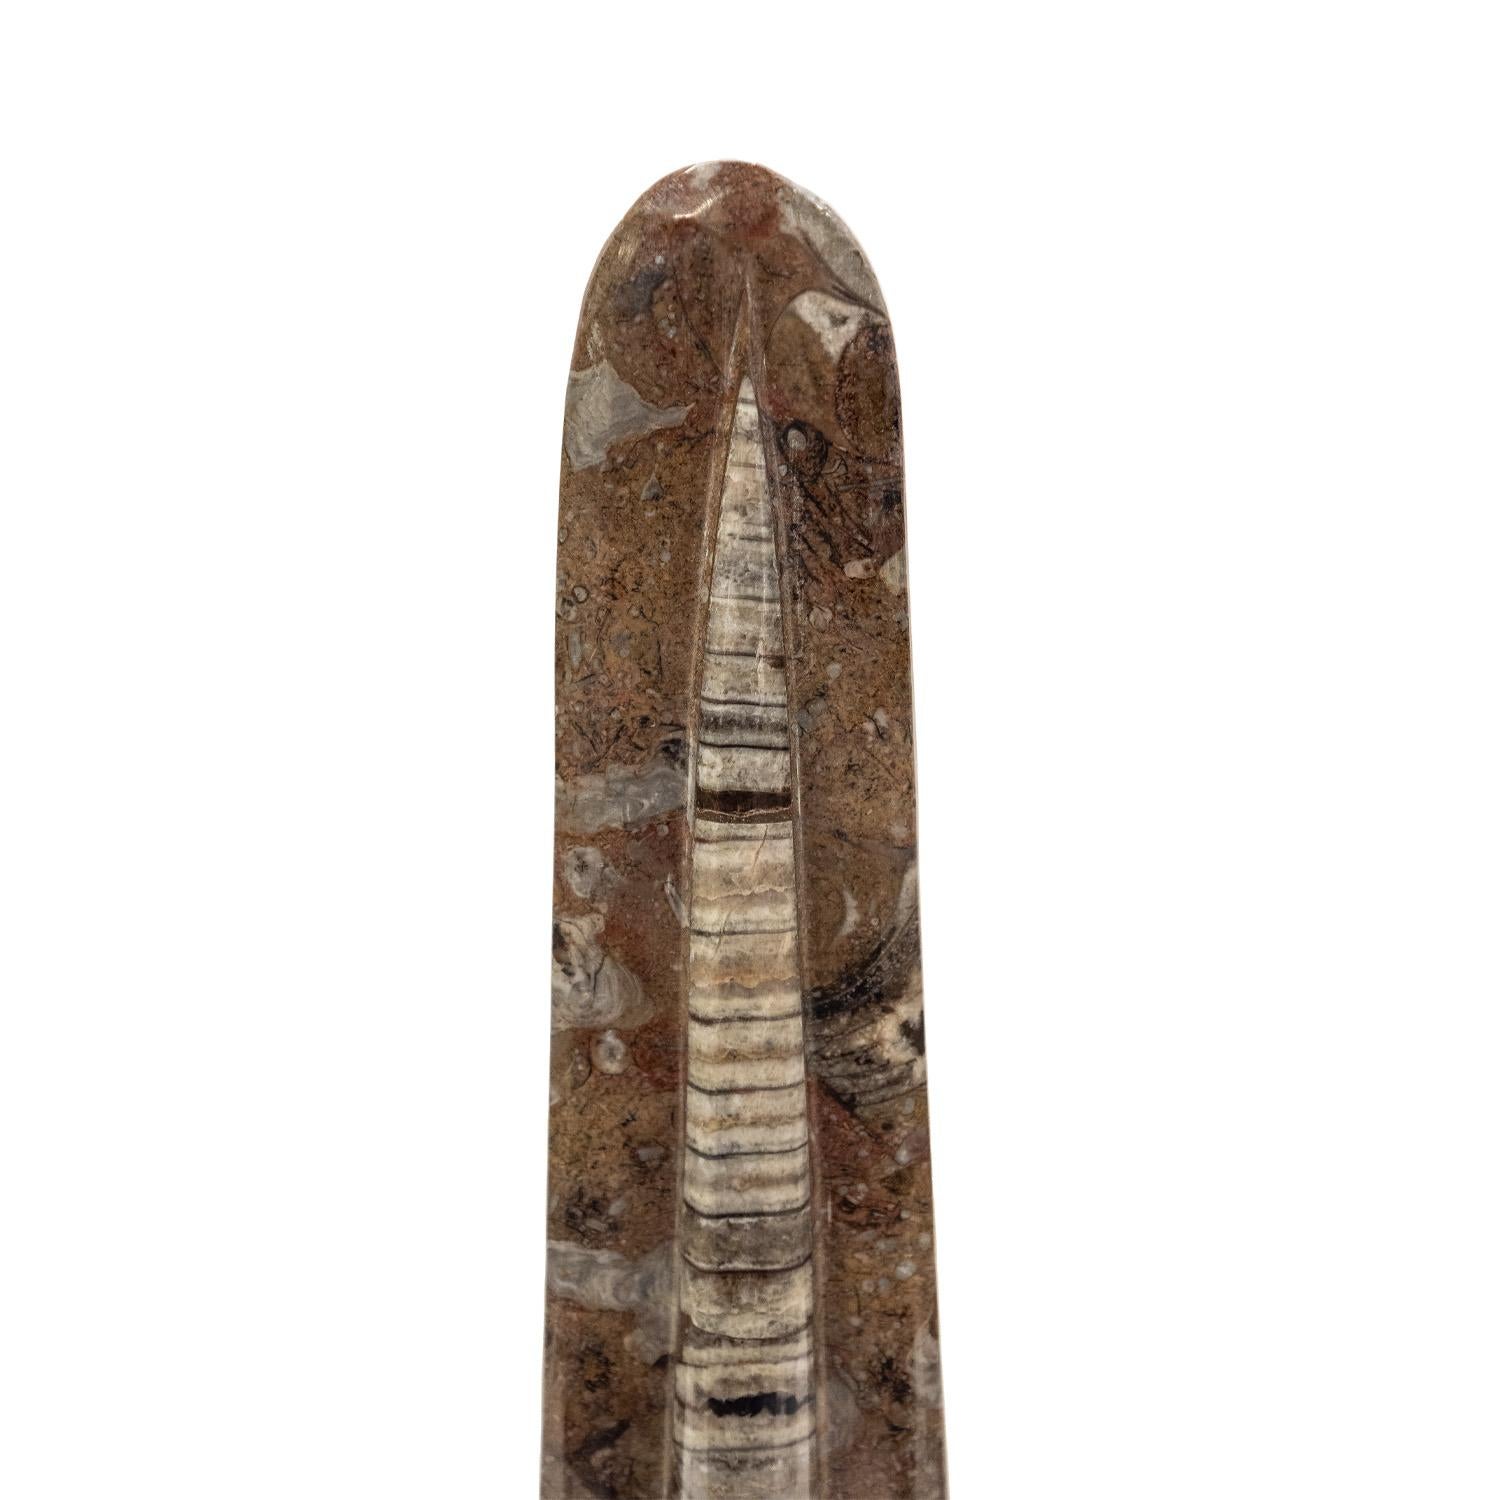 Exceptional Pair of Obelisk Shaped Fossil Sculptures 1980s In Excellent Condition For Sale In New York, NY